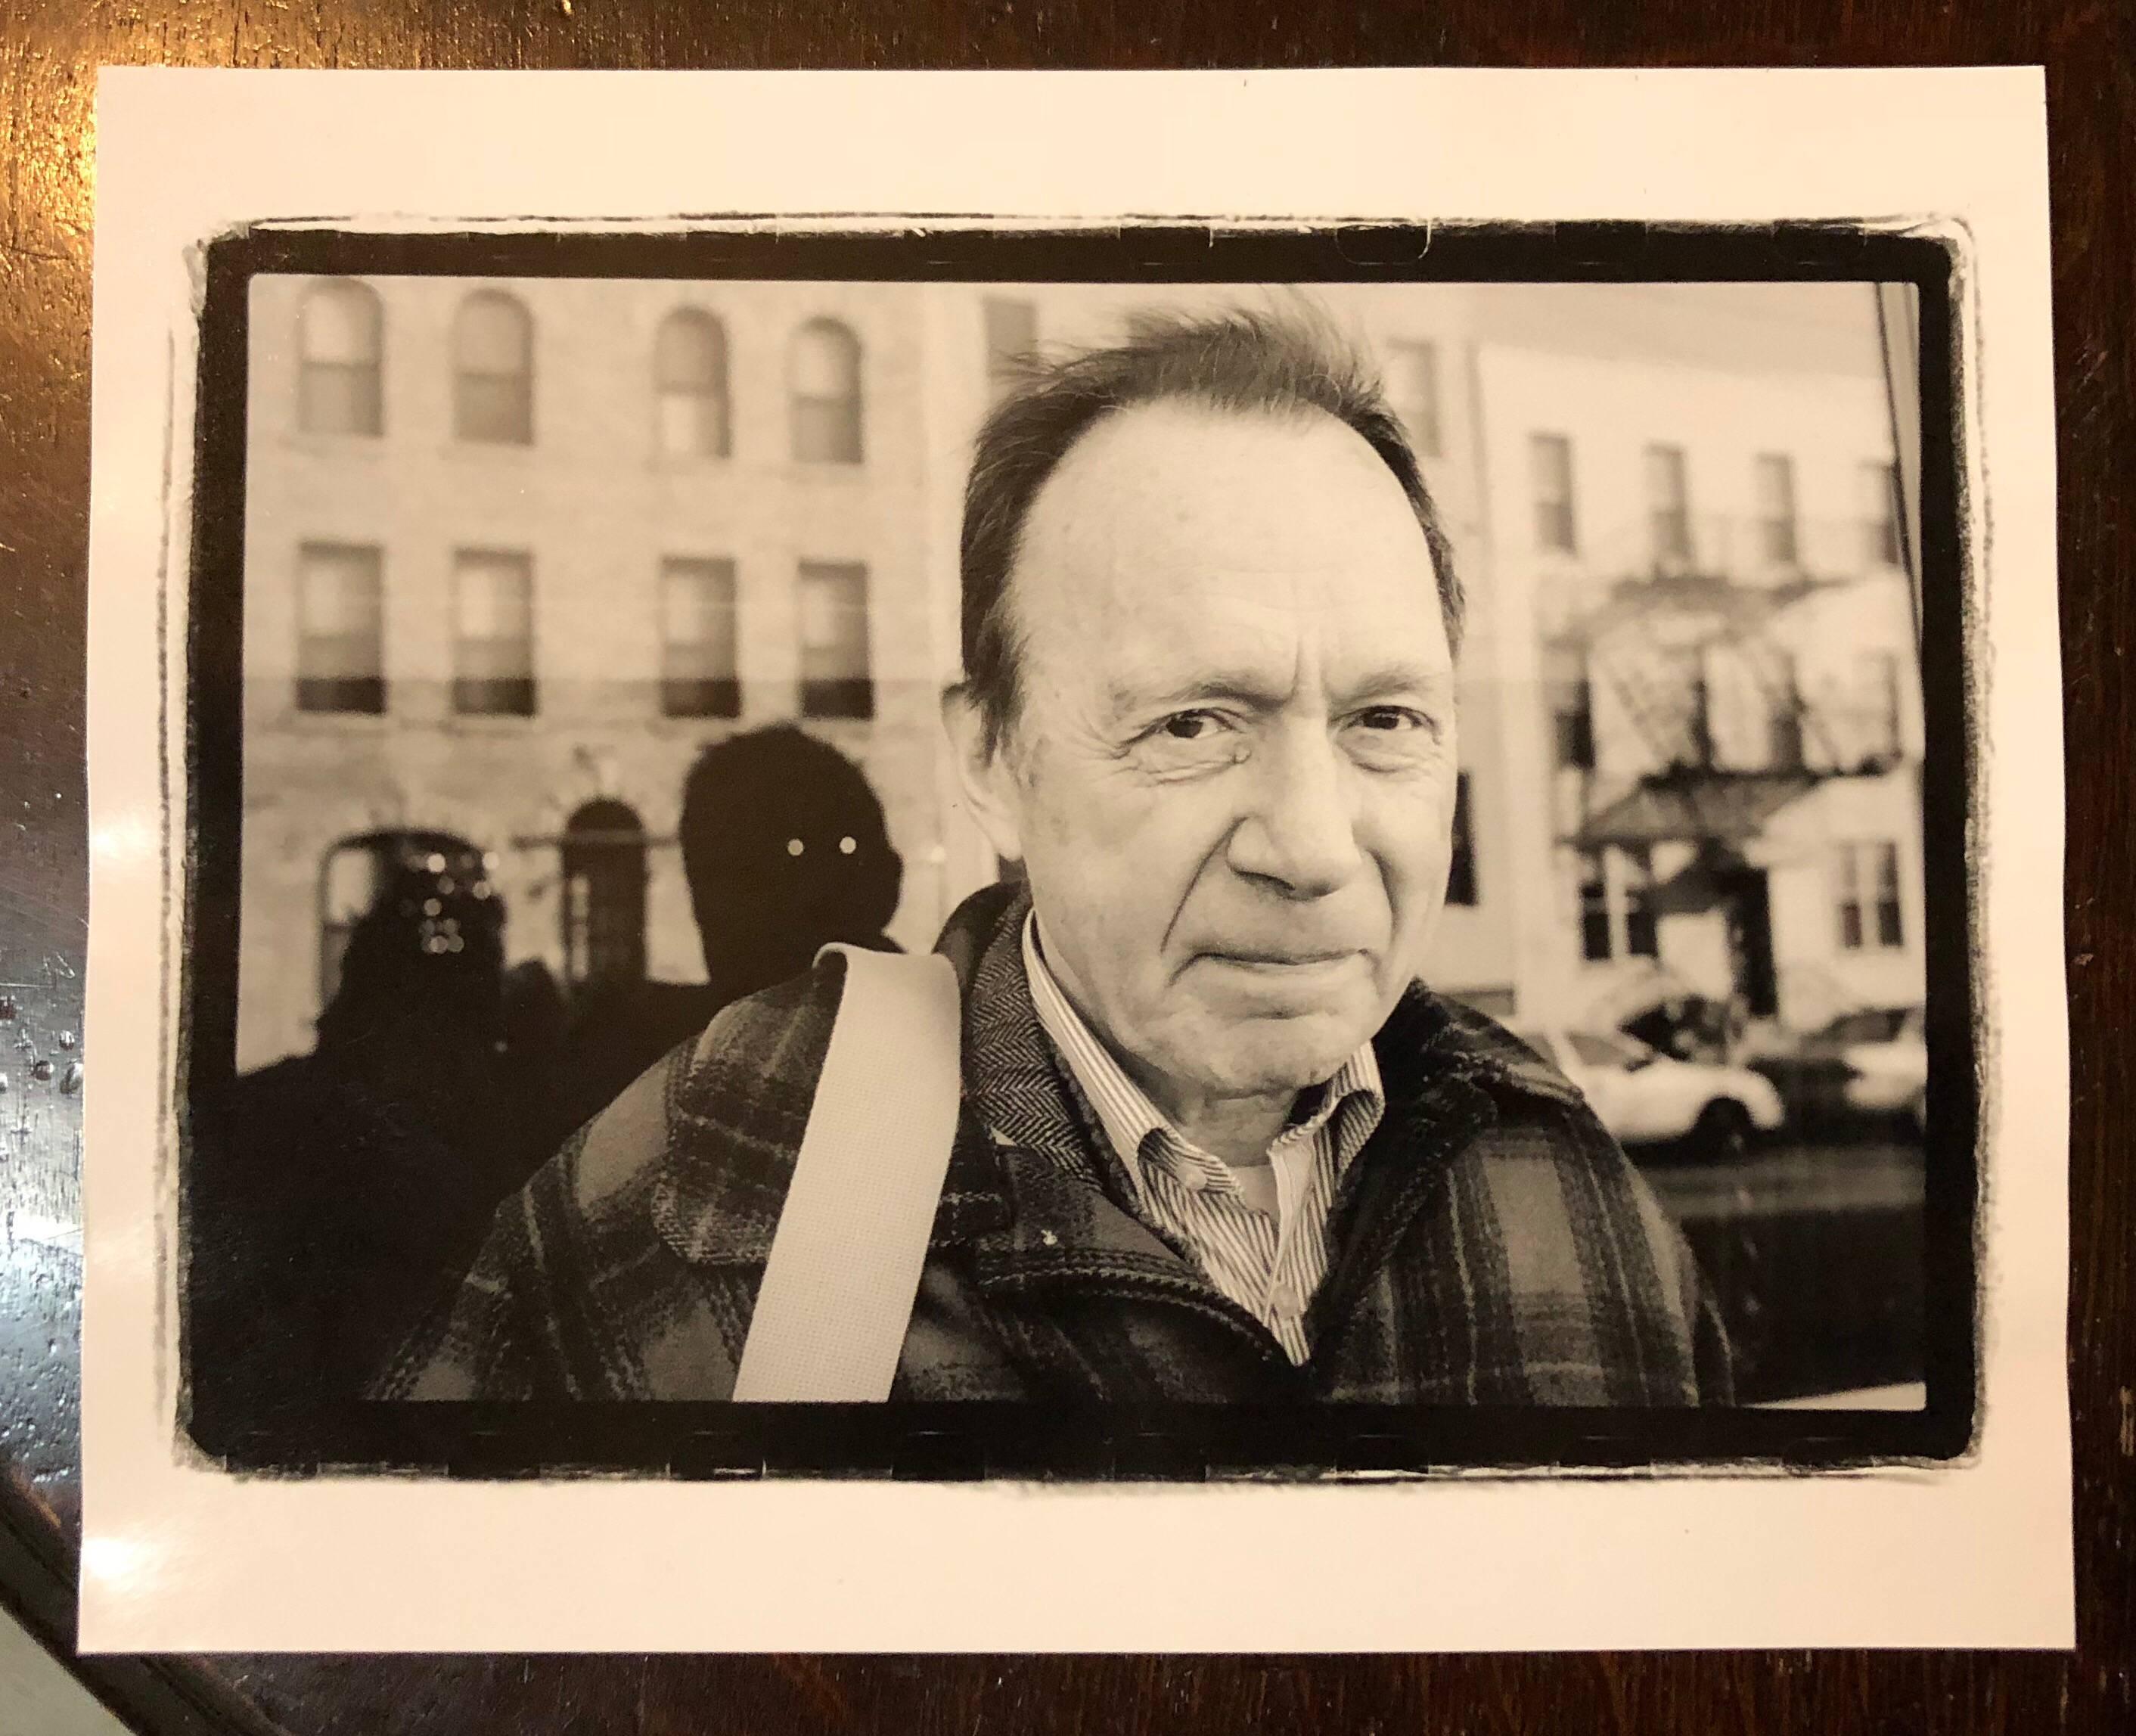 Gerard Joseph Malanga (born March 20, 1943) is an American poet, photographer, filmmaker, curator and archivist.
Malanga was born in the Bronx in 1943, the only child of Italian immigrant parents. In 1959, at the beginning of his senior year at the